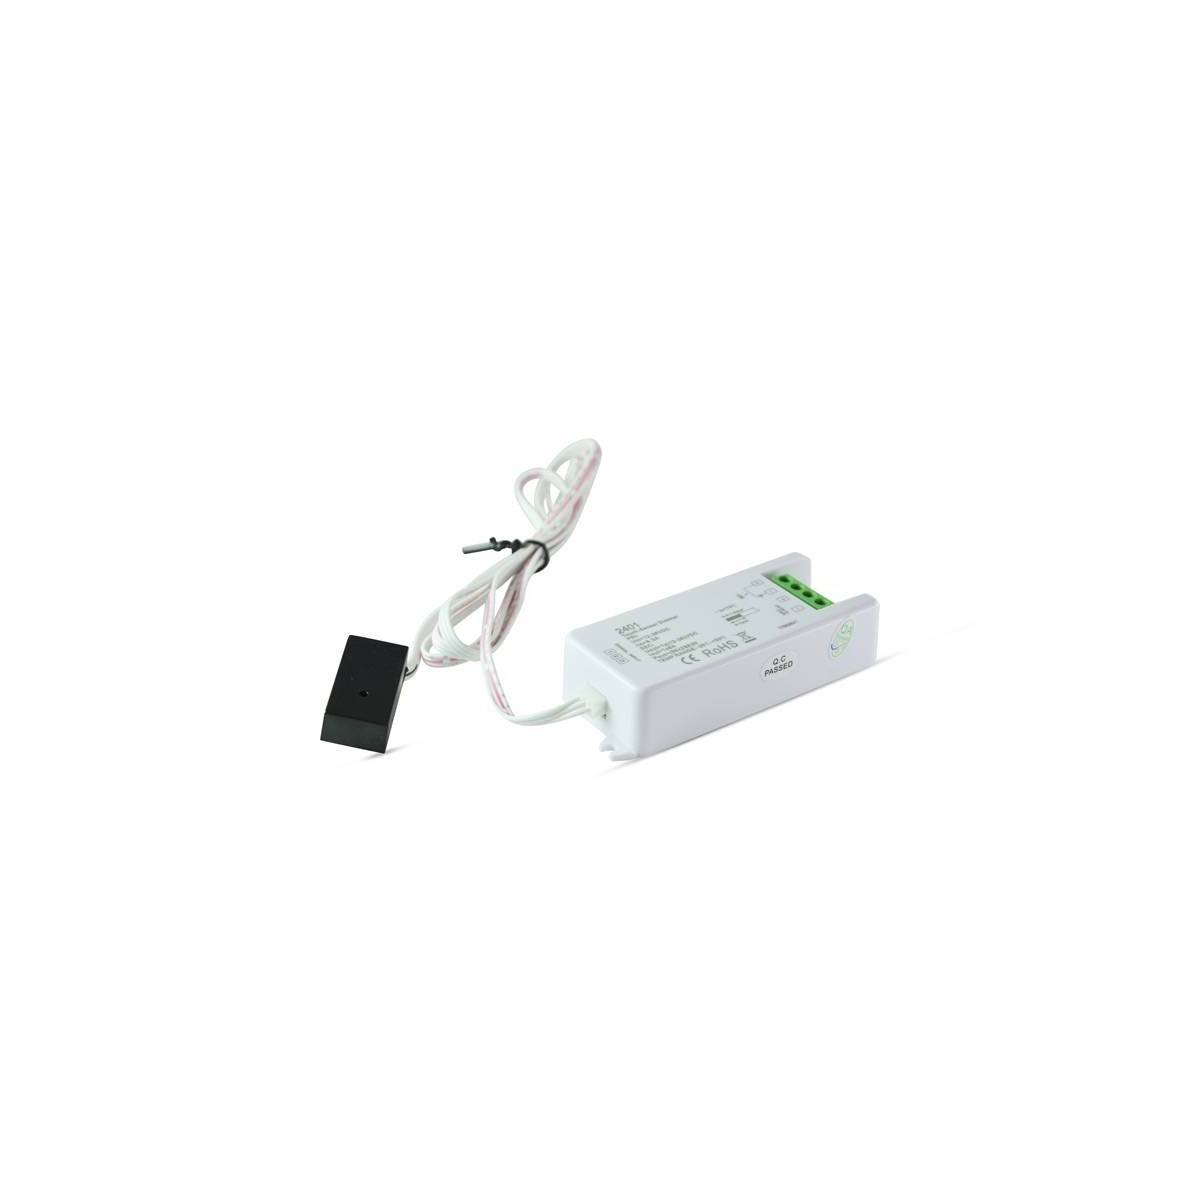 Acquista l'interruttore Dimmer Surface Touch